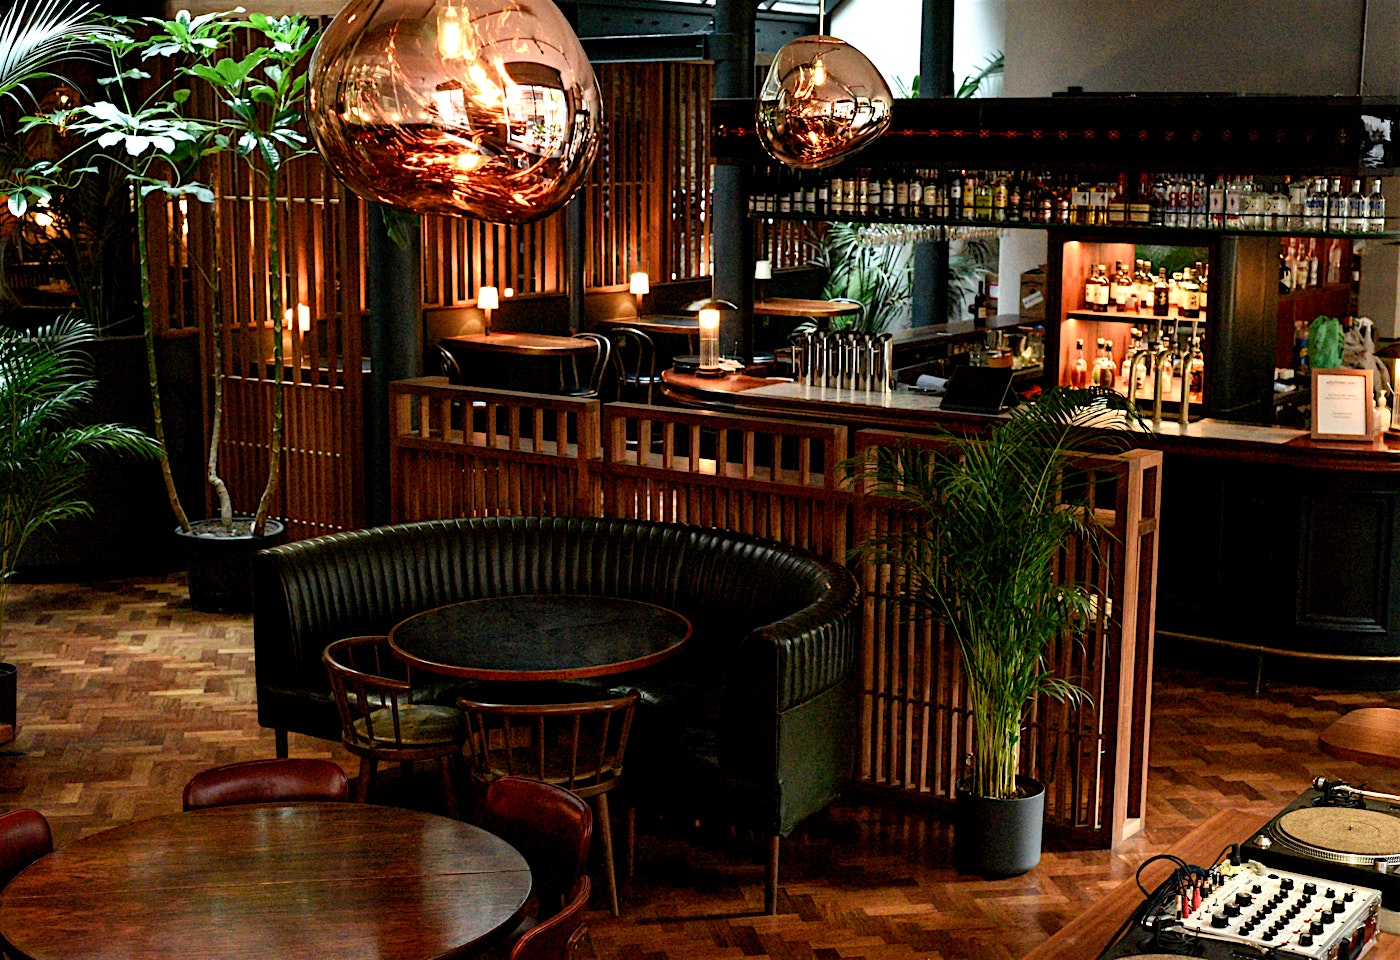 interior of apothecary east in old street in london